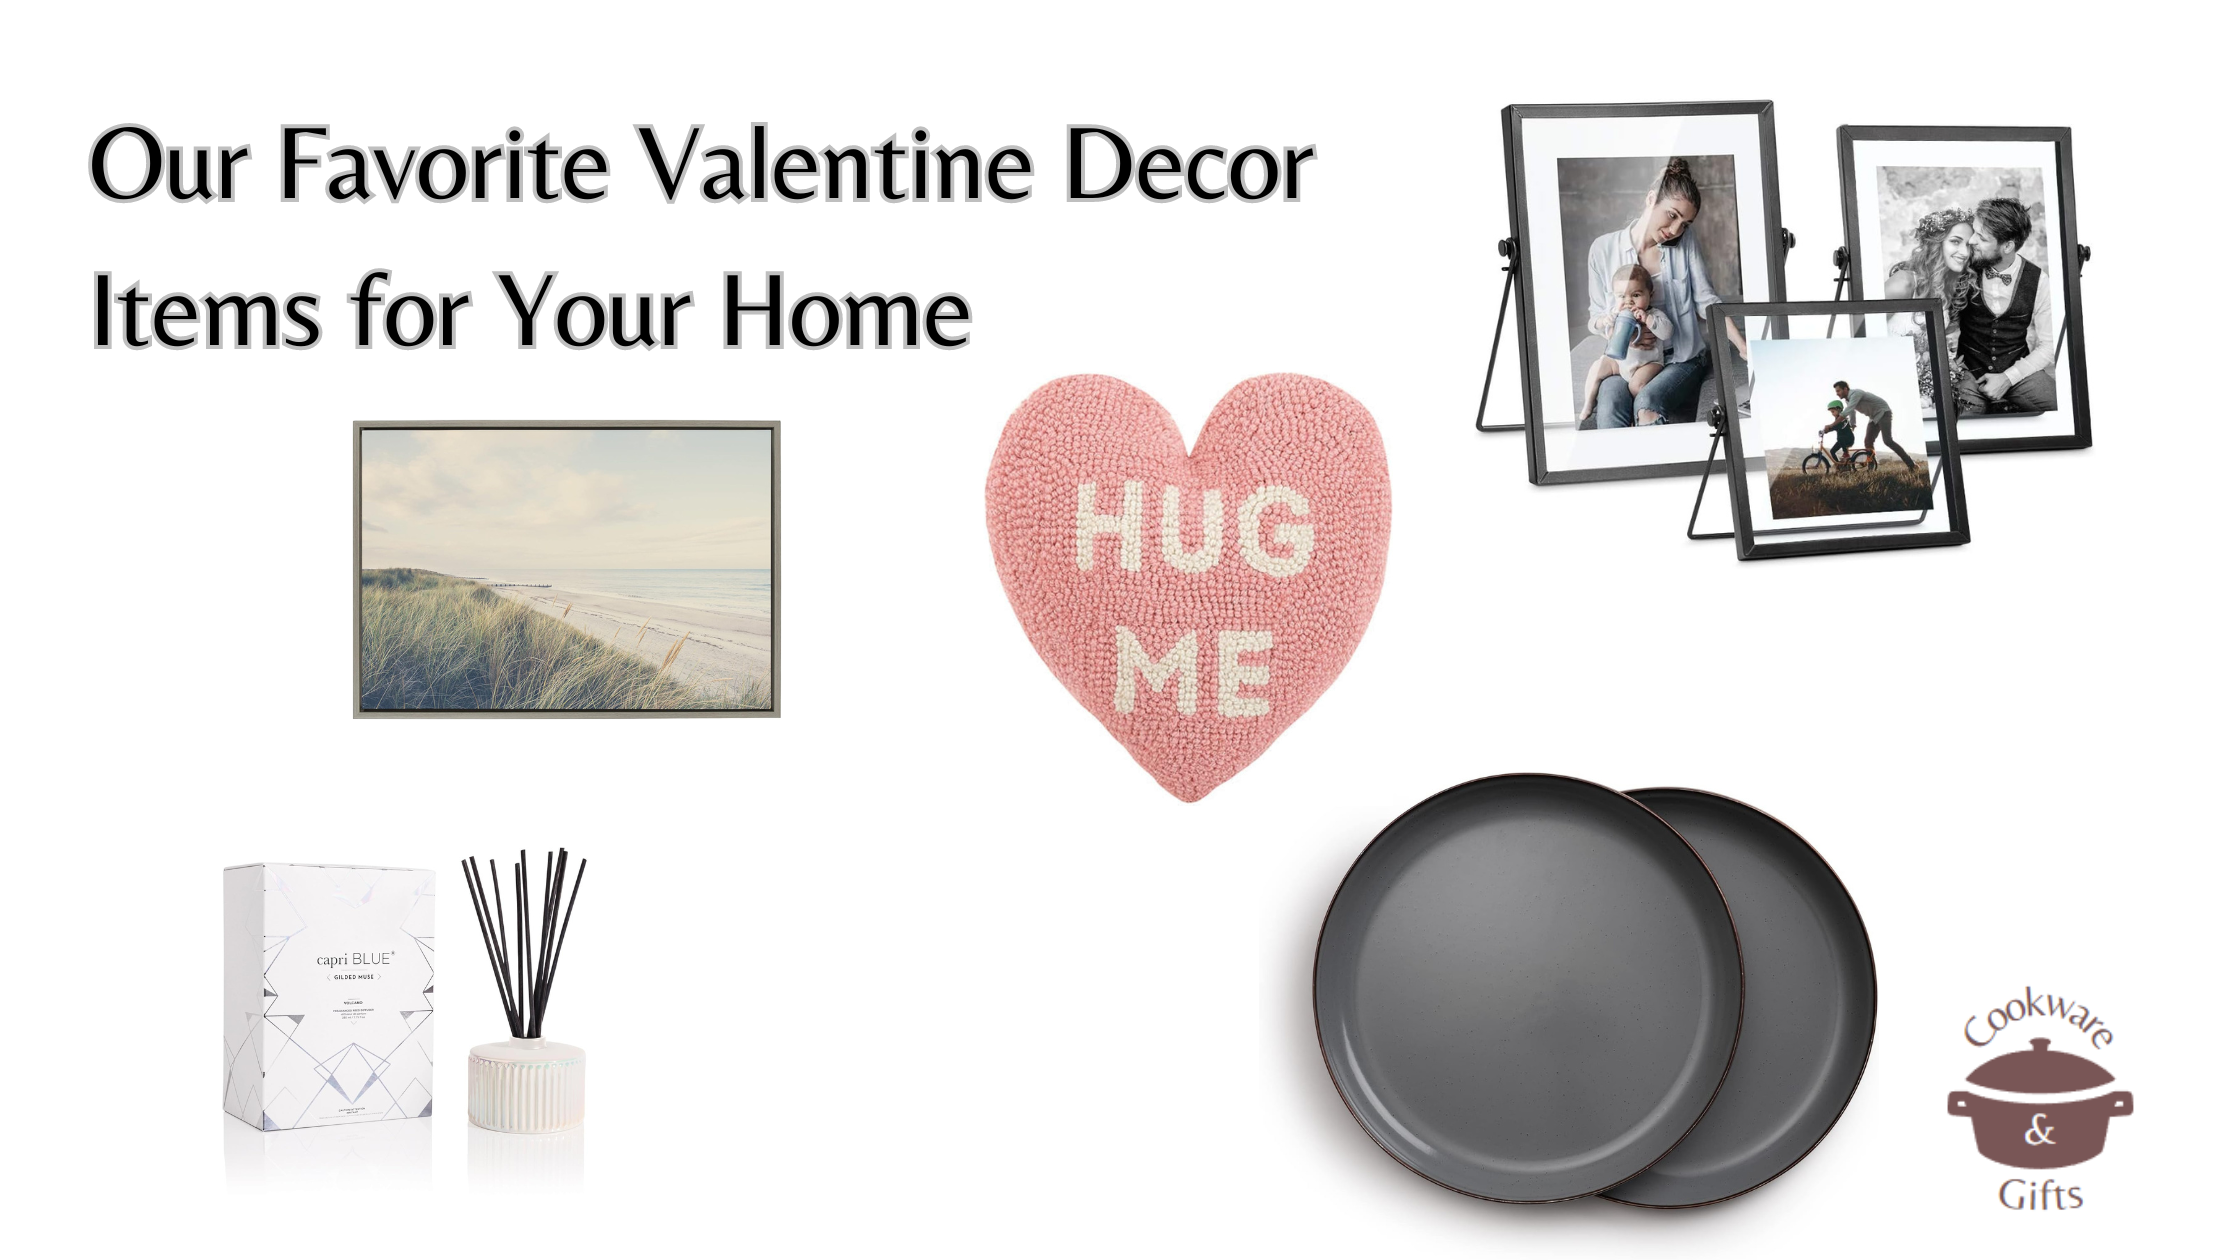 Our Favorite Valentine Decor Items That Will Add a Little Love to Your Home